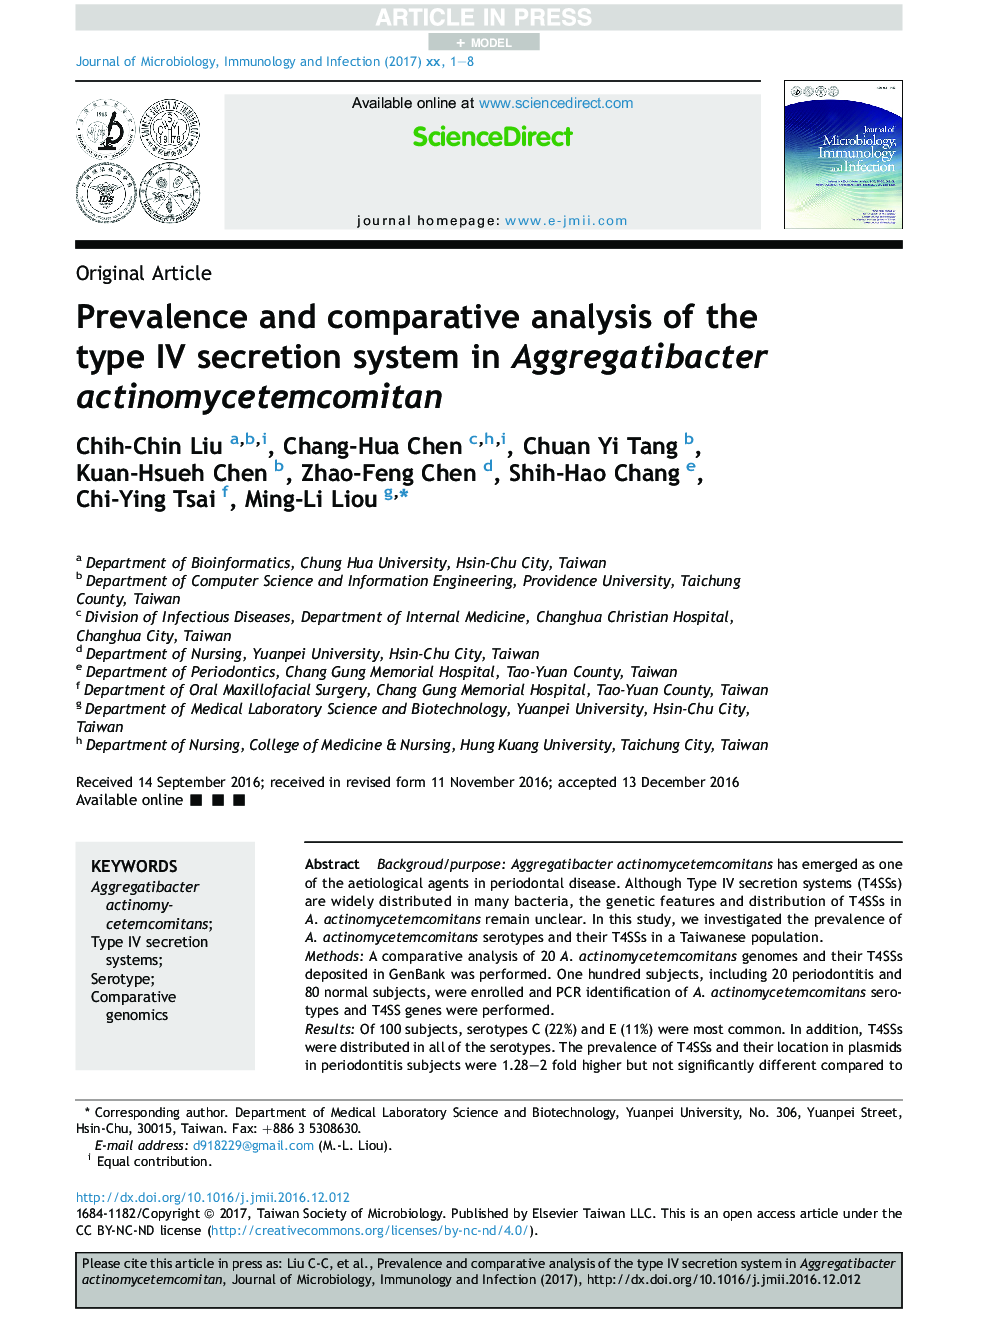 Prevalence and comparative analysis of the type IV secretion system in Aggregatibacter actinomycetemcomitan